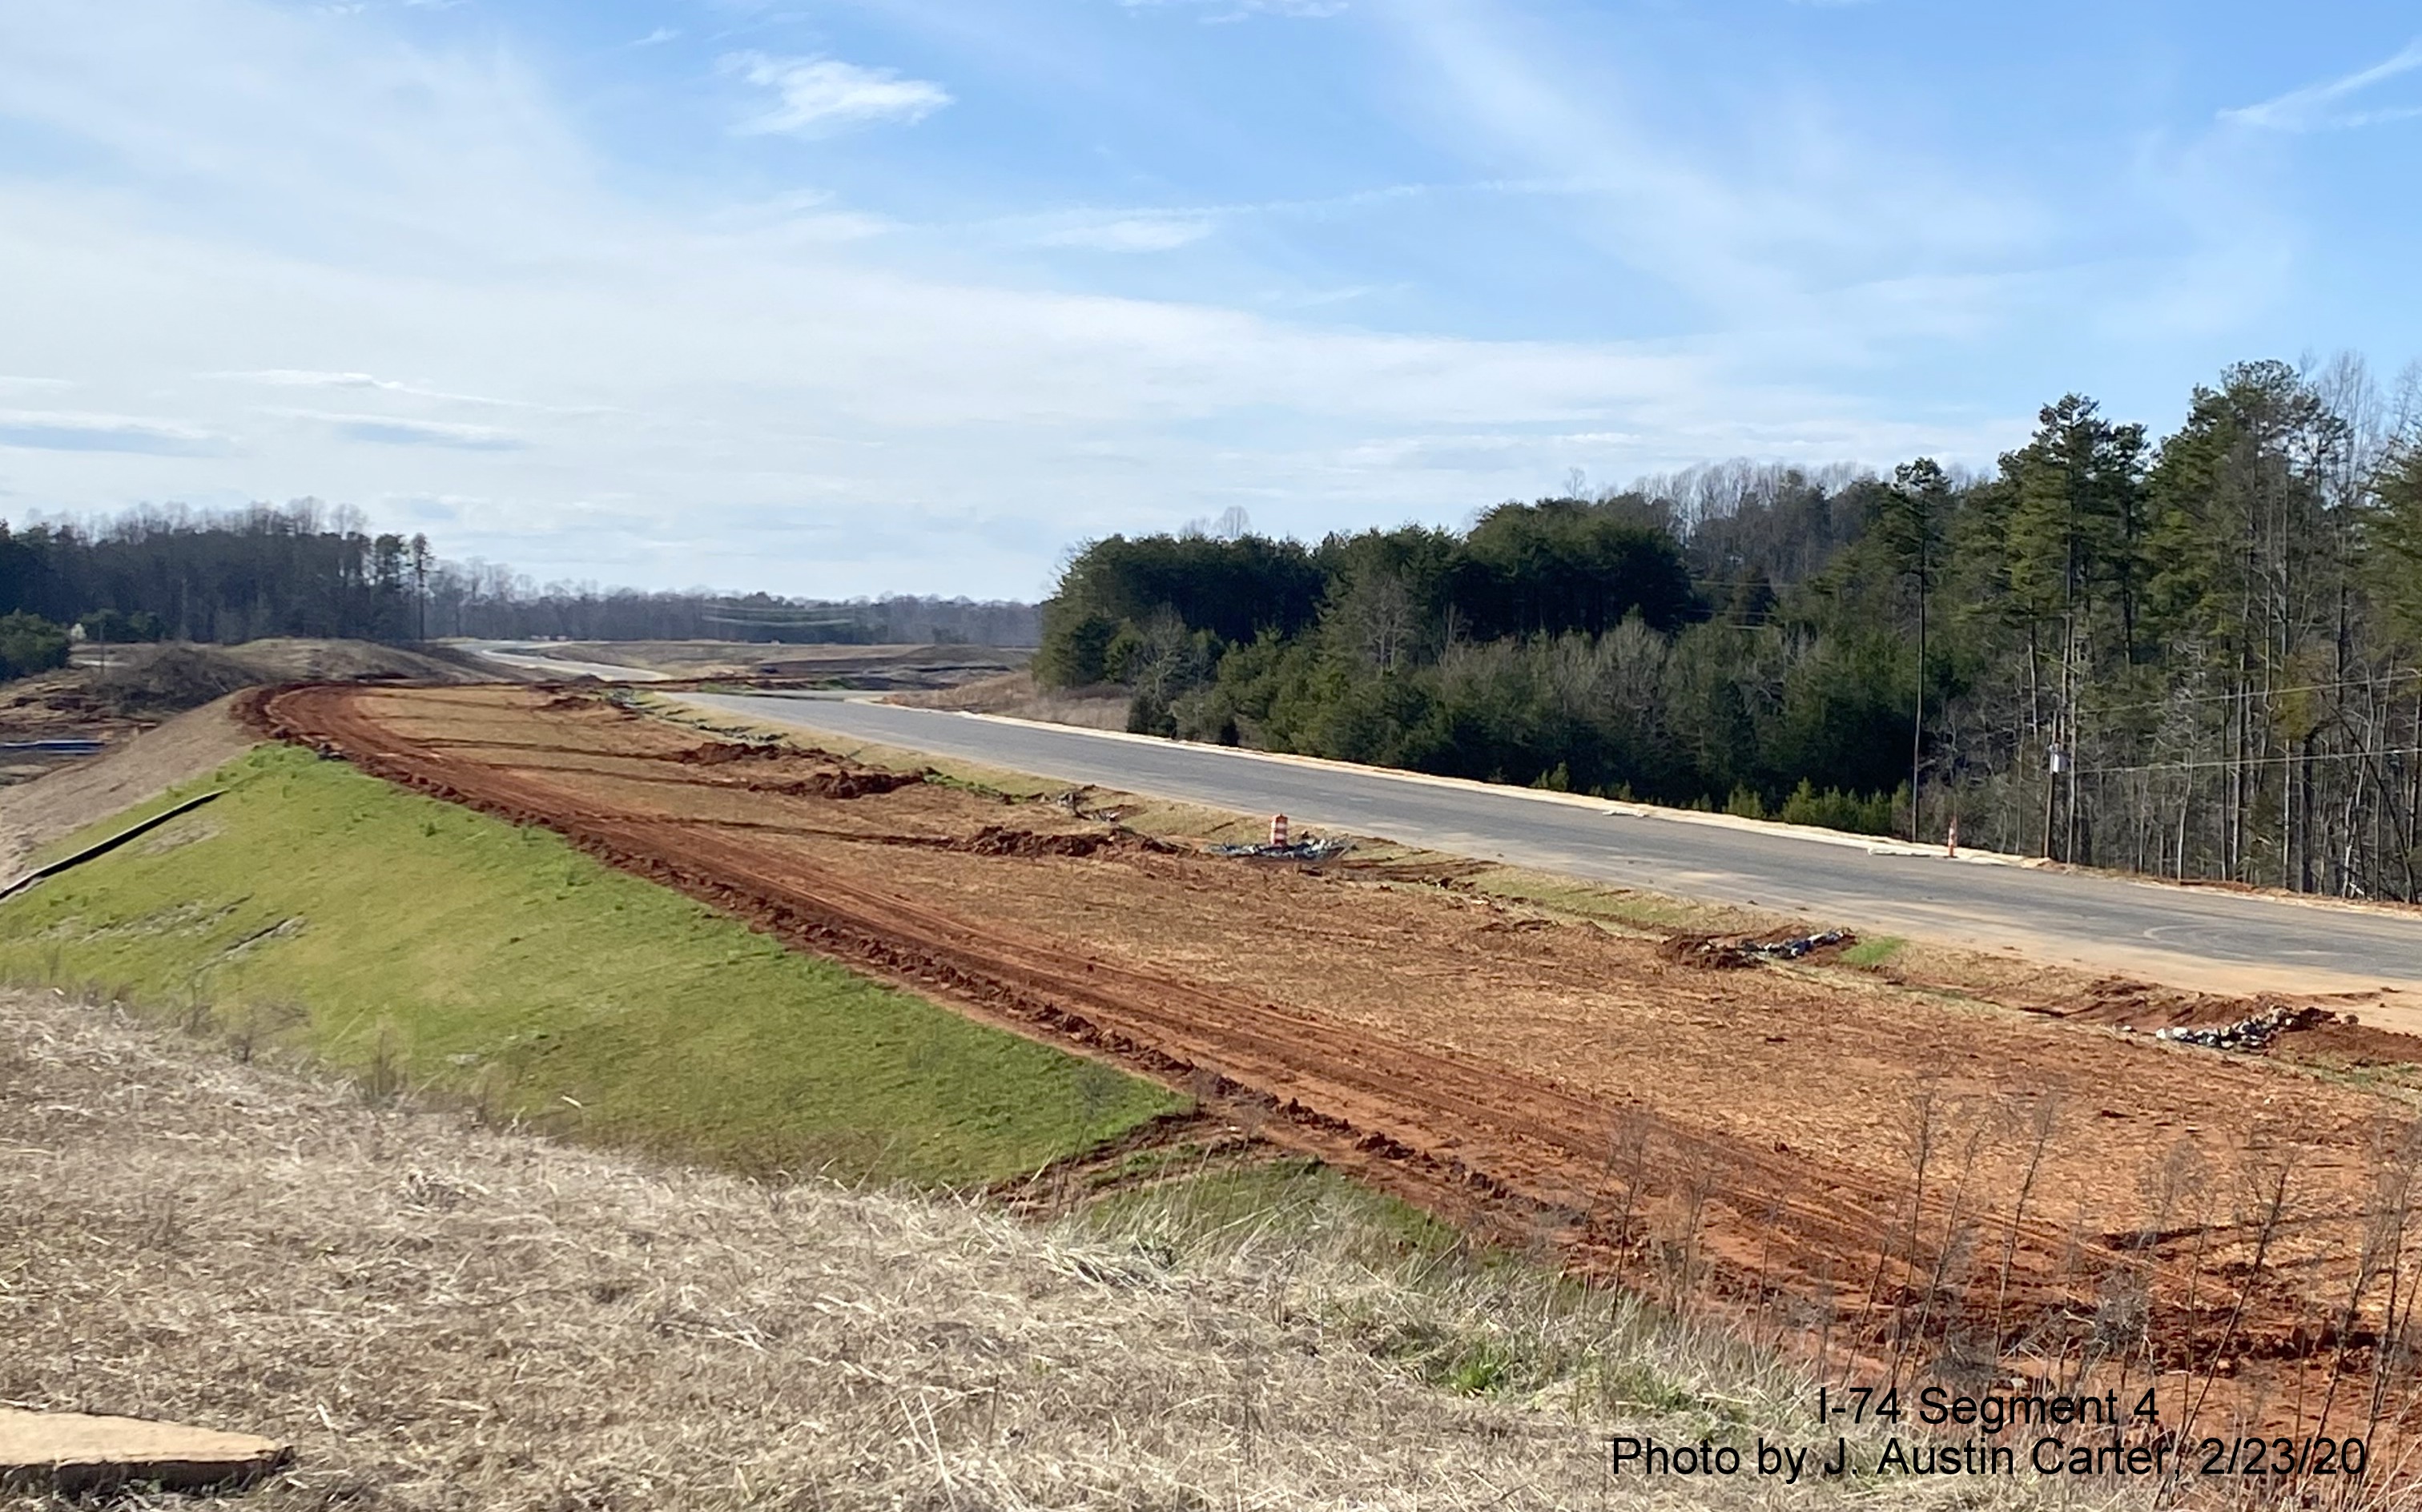 Image of road construction in vicinity of Dillon Farm Road looking west along roadbed of 
        future I-74/Winston-Salem Beltway toward US 311, by J. Austin Carter in Feb. 2020